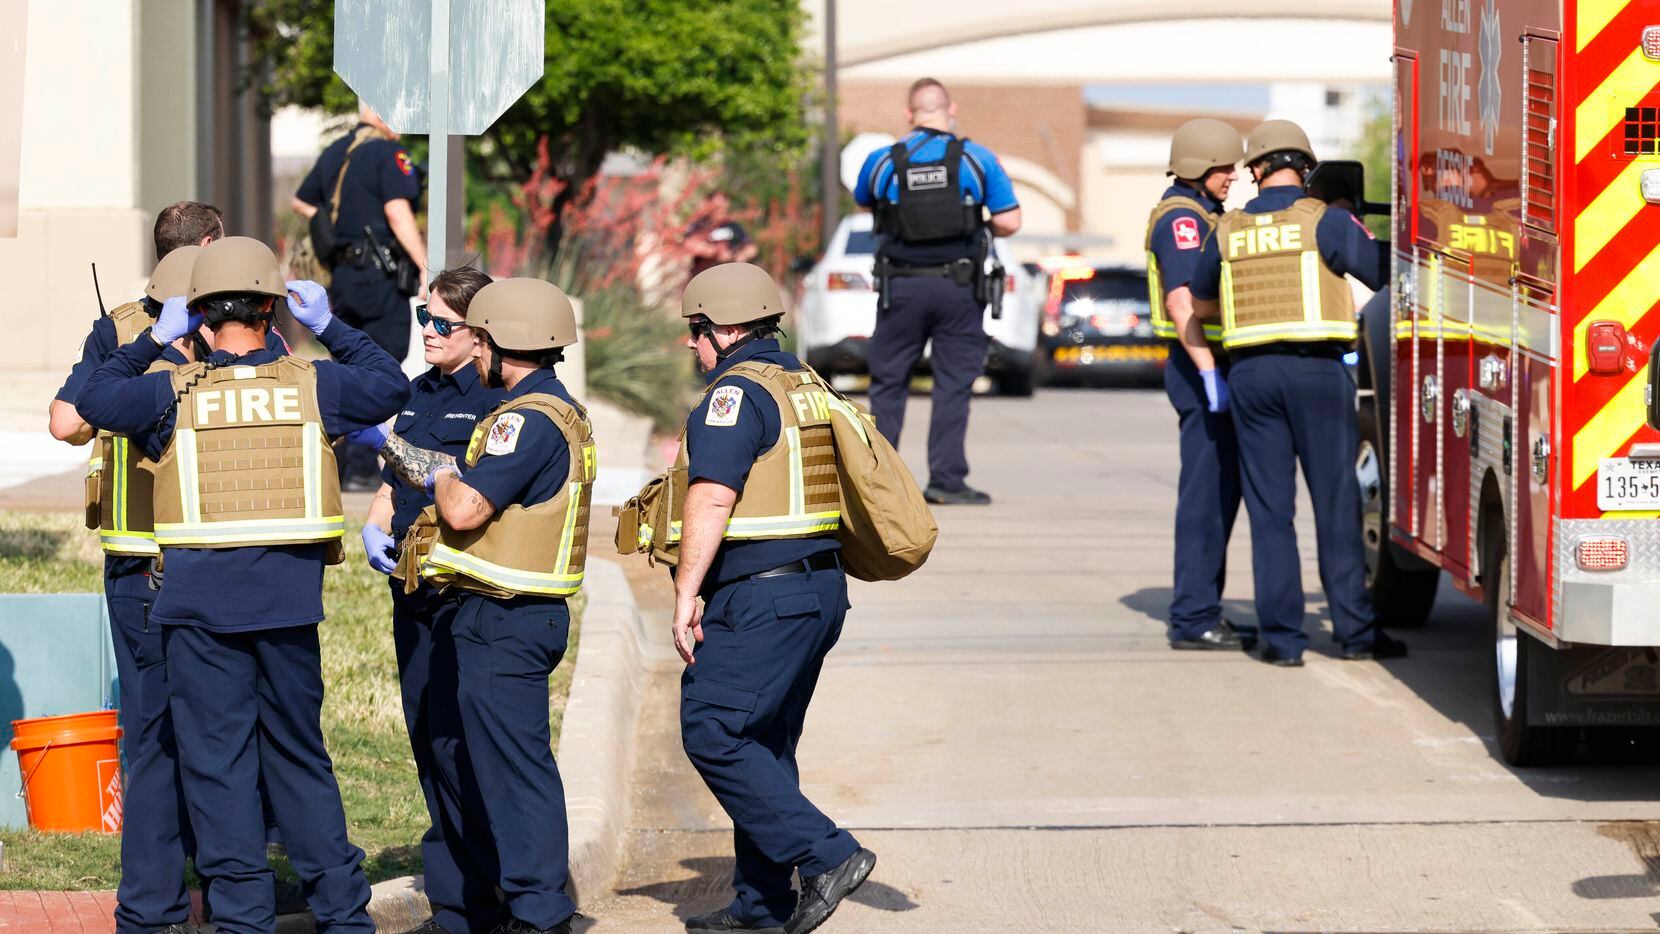 Law enforce authorities gather outside of the Allen Premium Outlets mall after a shooting...